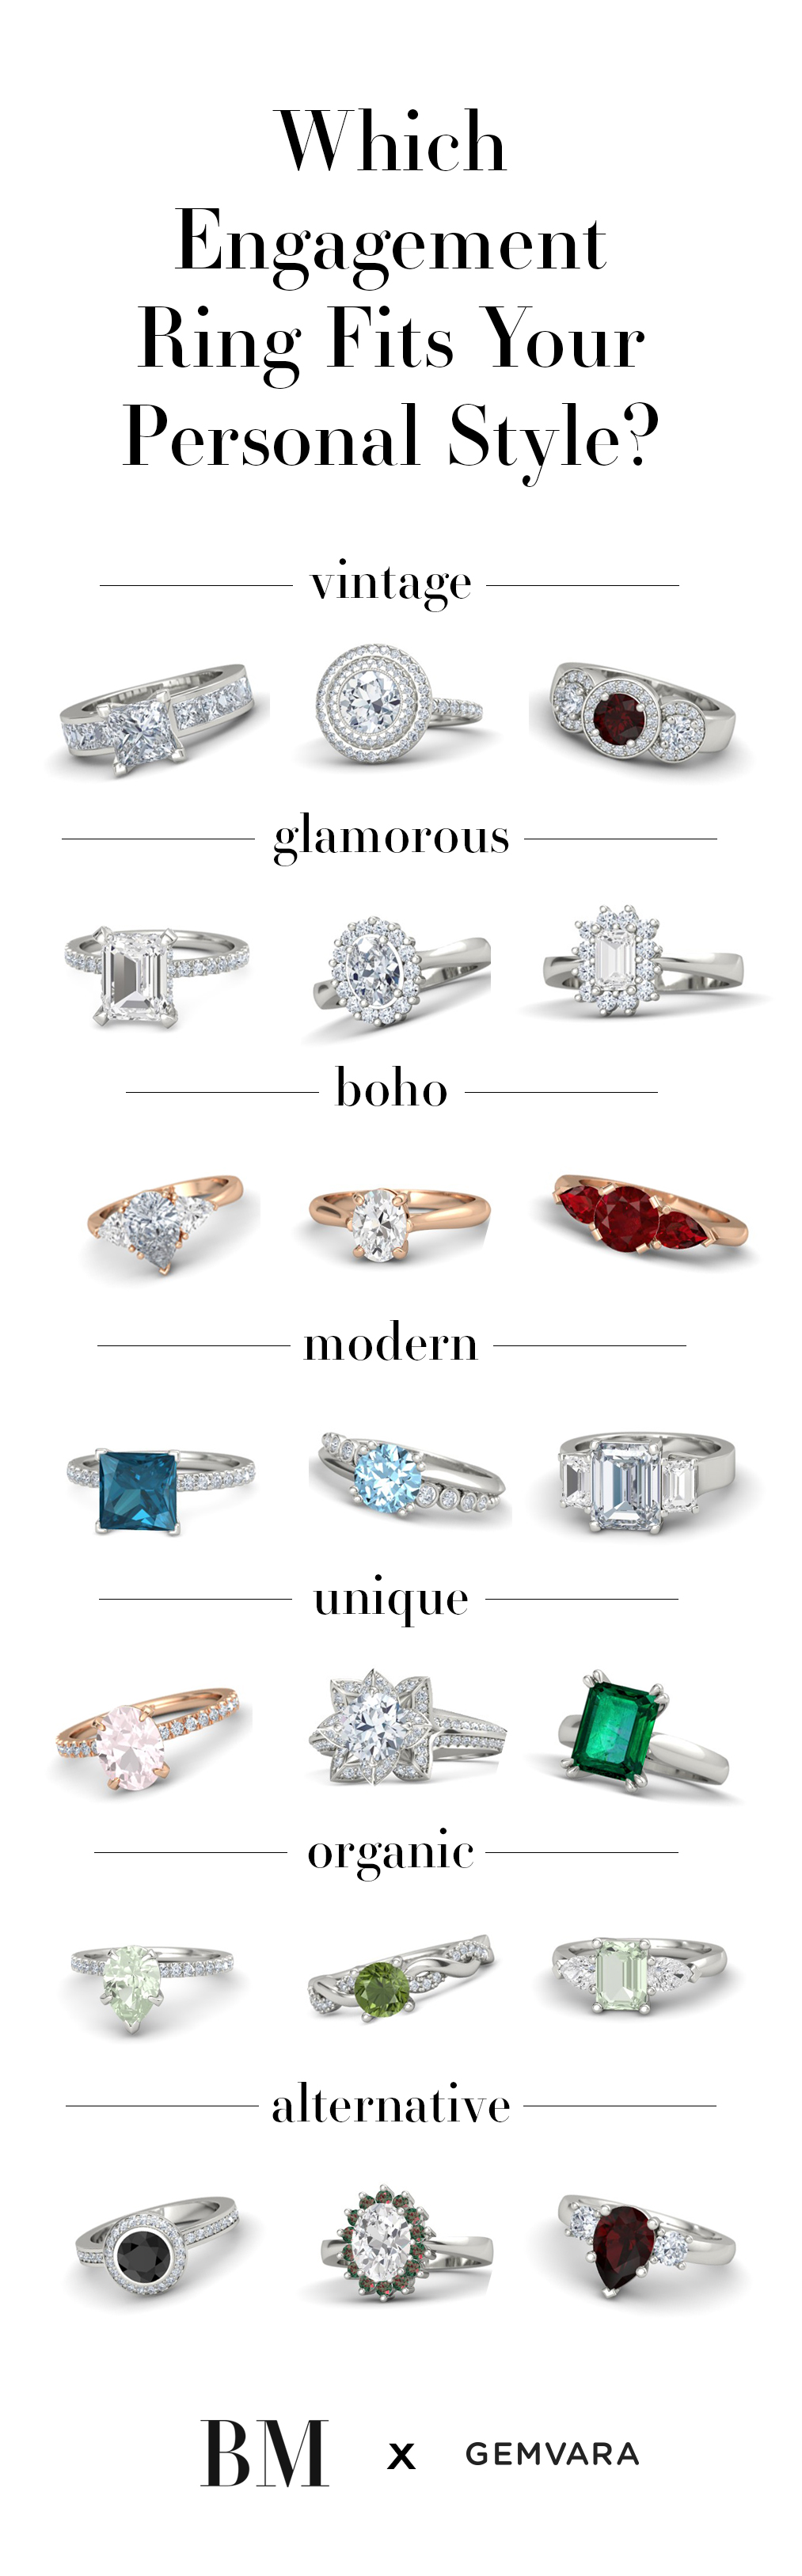 Can we guess which engagement ring fits your personal style?